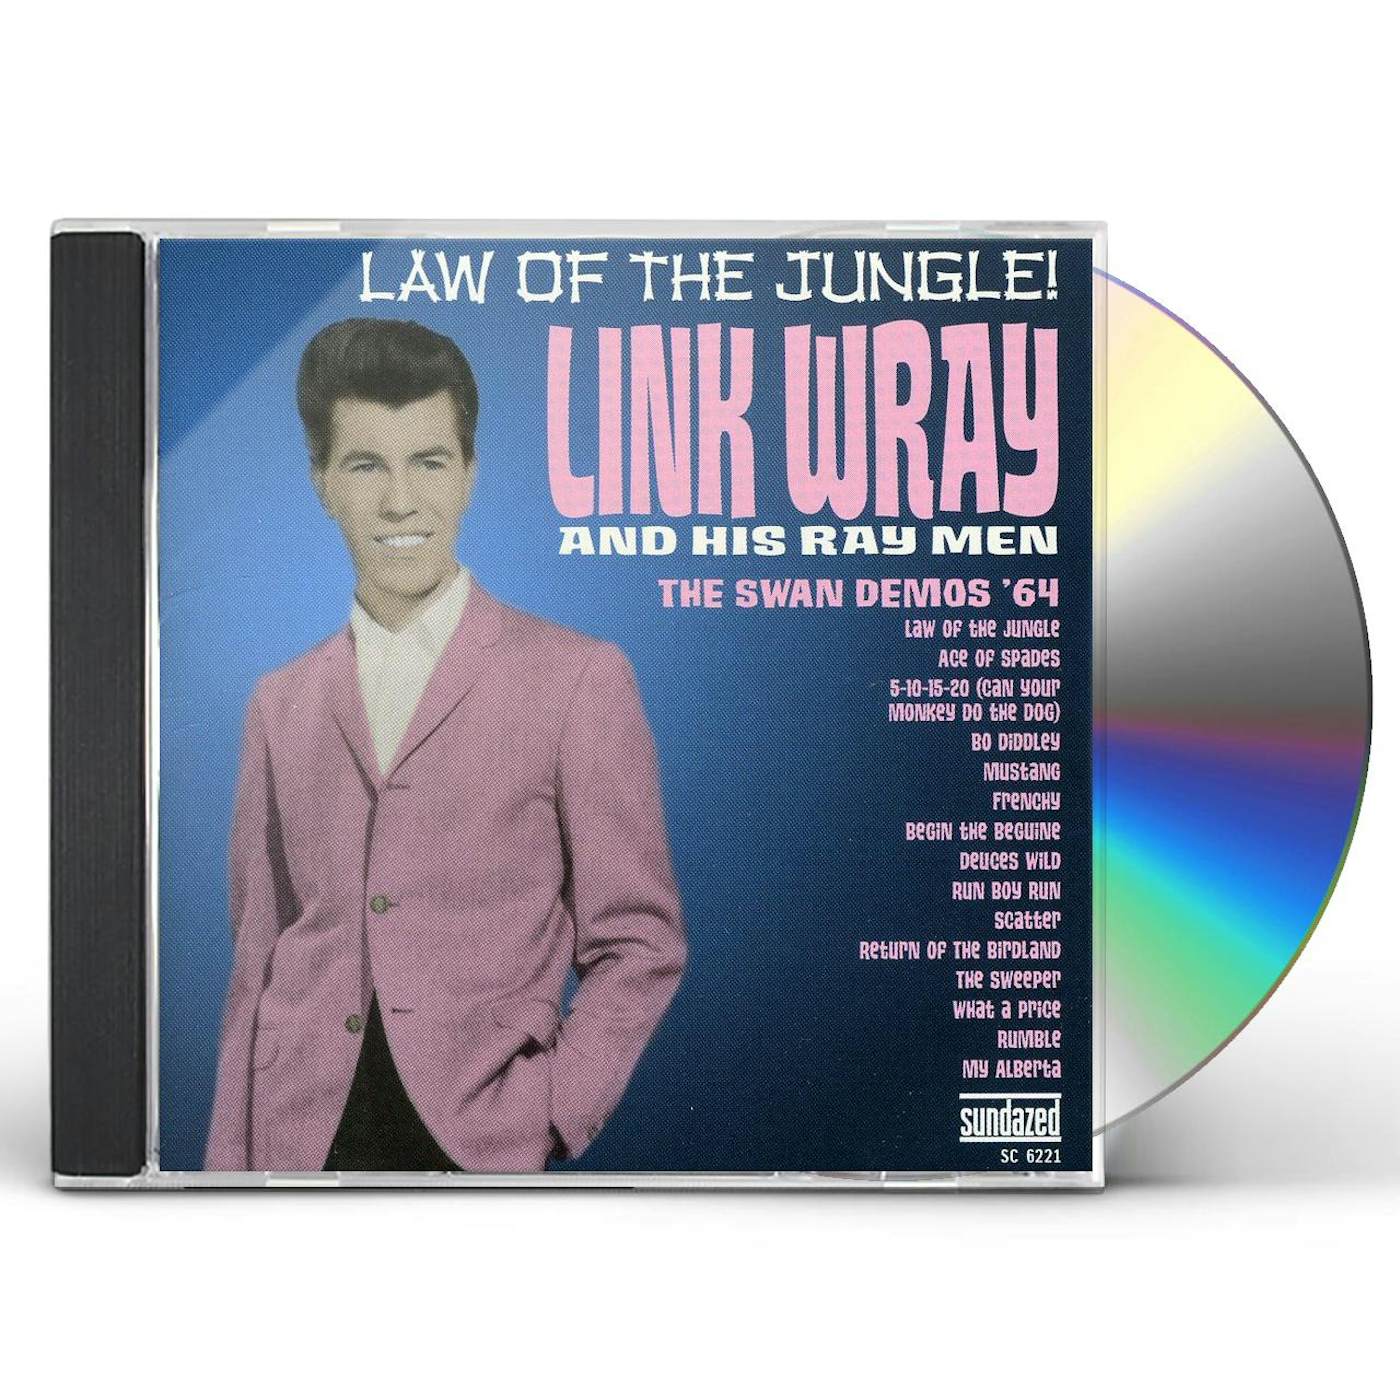 Link Wray LAW OF THE JUNGLE: 64 SWAN DEMOS CD